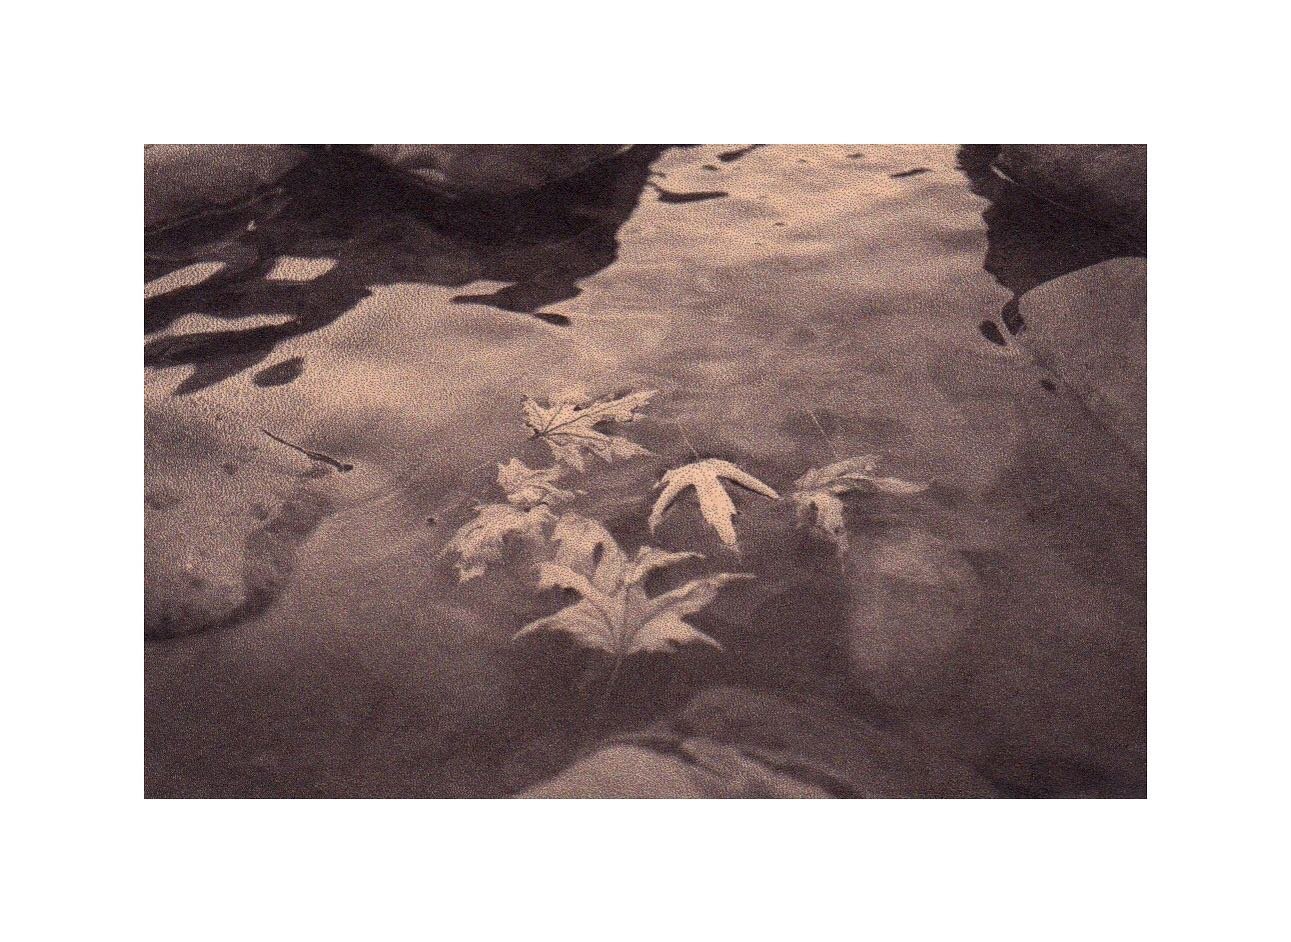 &ldquo;Lamenting the Earth&rdquo; 
Toned rice paper prints
.
.
.
.
.
.
#alternativeprocesses #antiquated #antiquatedphotography #landscape #landscapephotography #landscapeart #melancholy #earth #poetry #pond #leaves #shadows #trees #prints #landscape